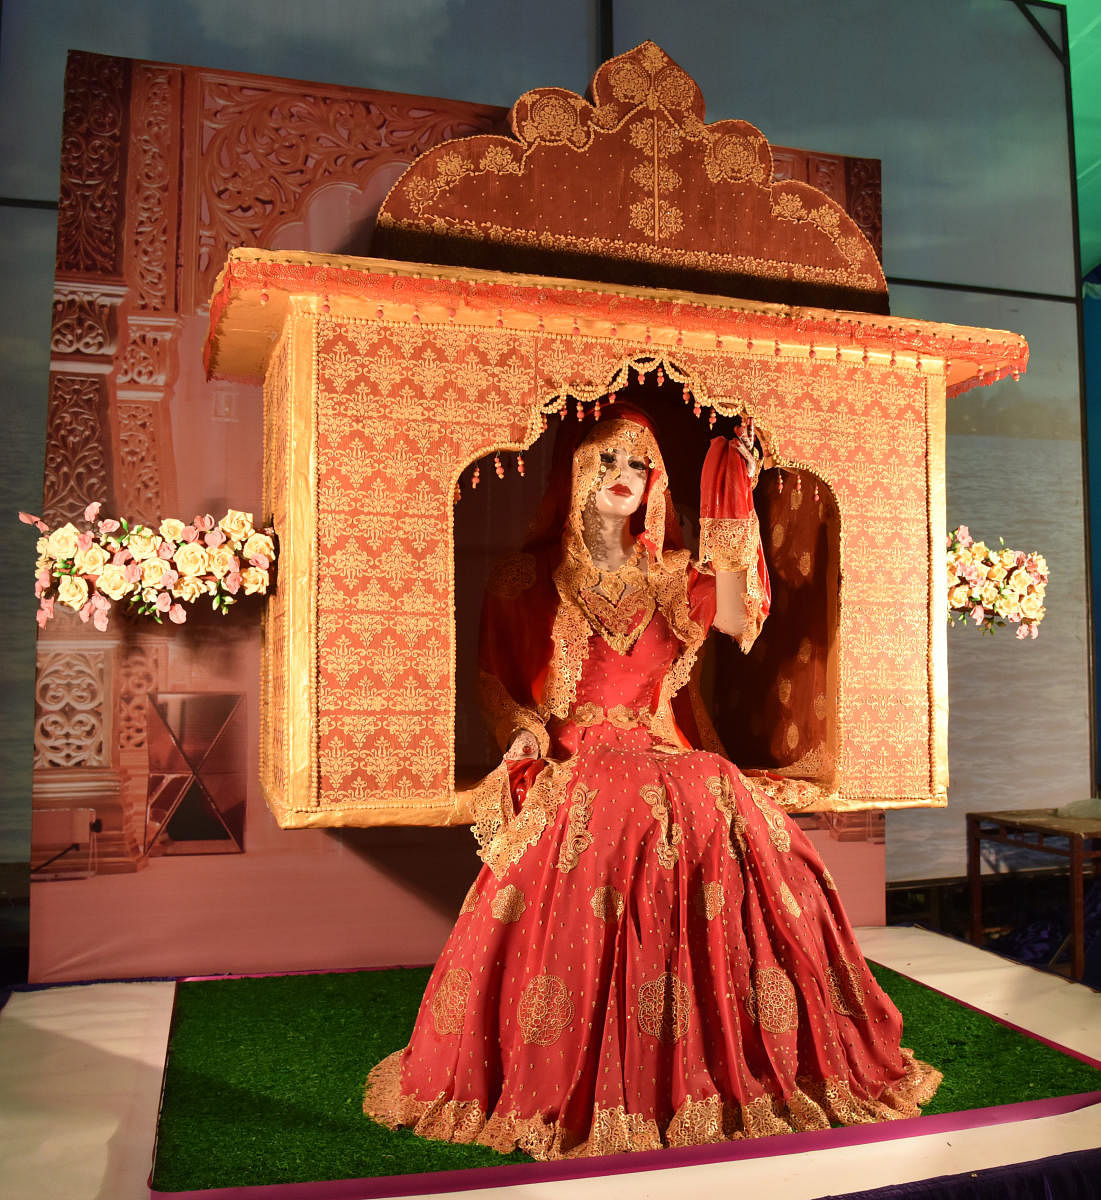 An Indian Doli, made of 145-kg structural material, fondant, sugar paste, royal icing and rice krispy at the annual cake show organised at St Joseph's Indian High School grounds in Bengaluru on Thursday. dh photo